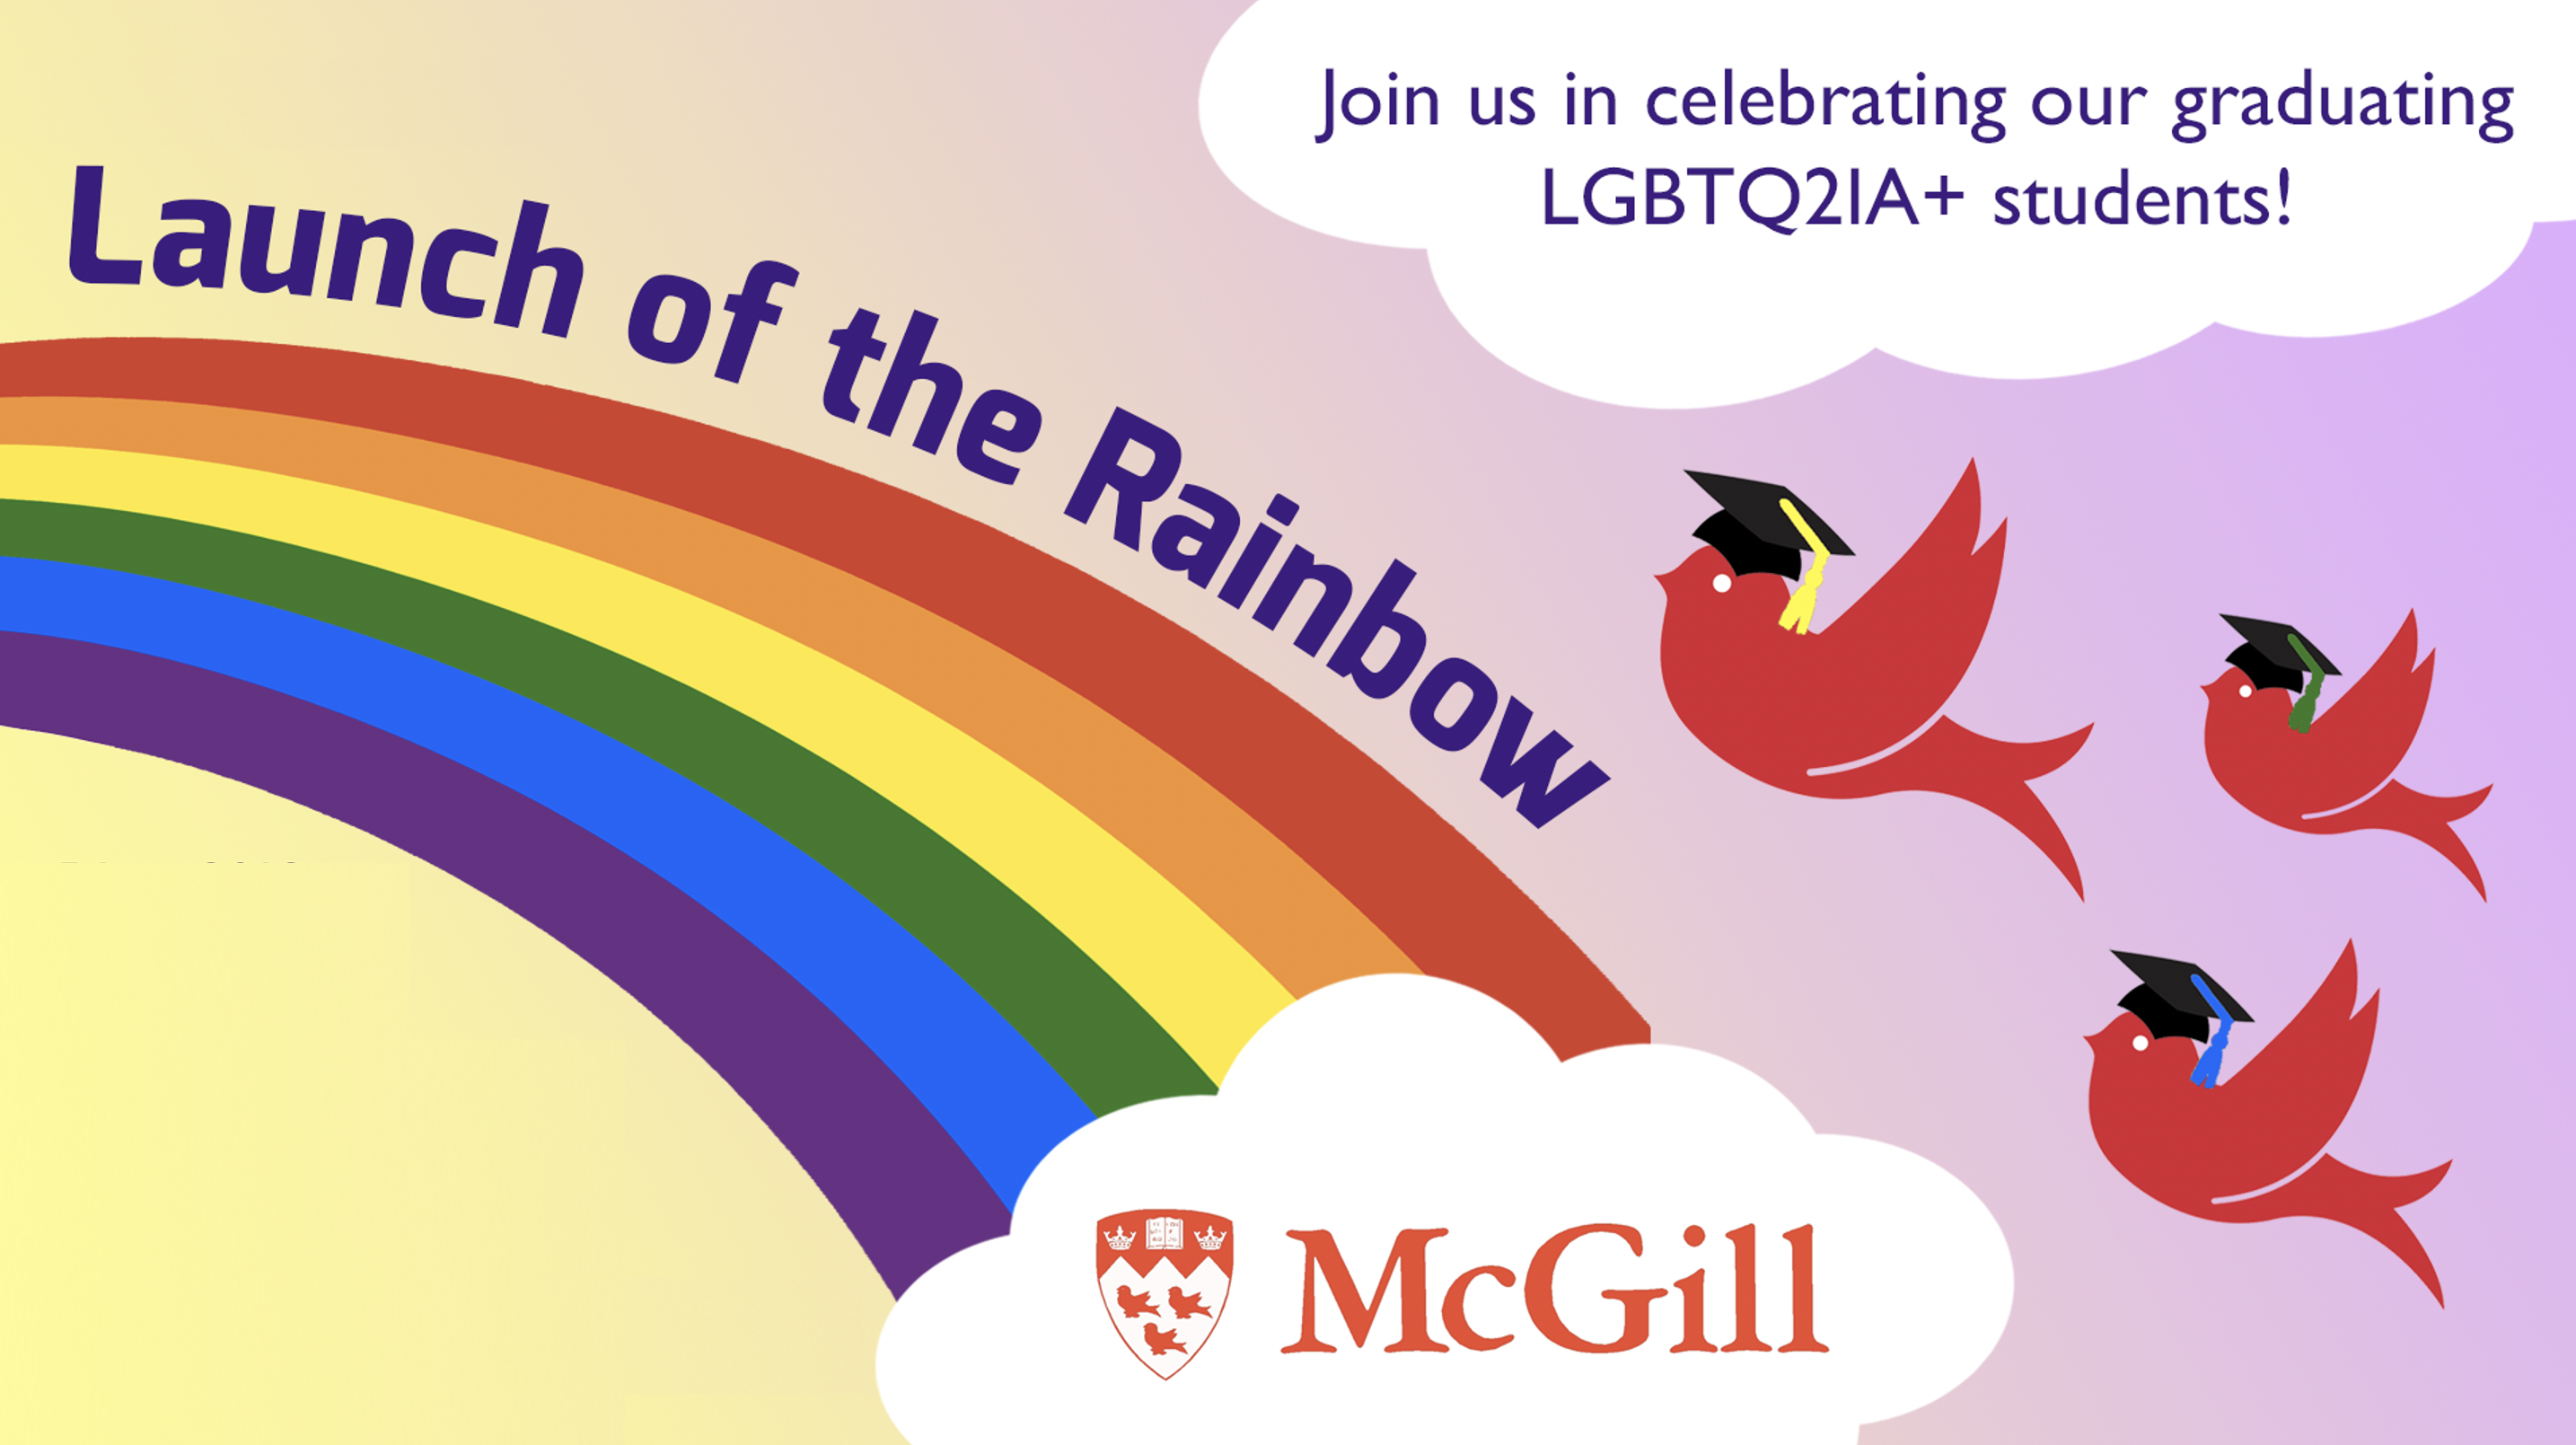 Martlet birds flying over a rainbow with the McGill logo